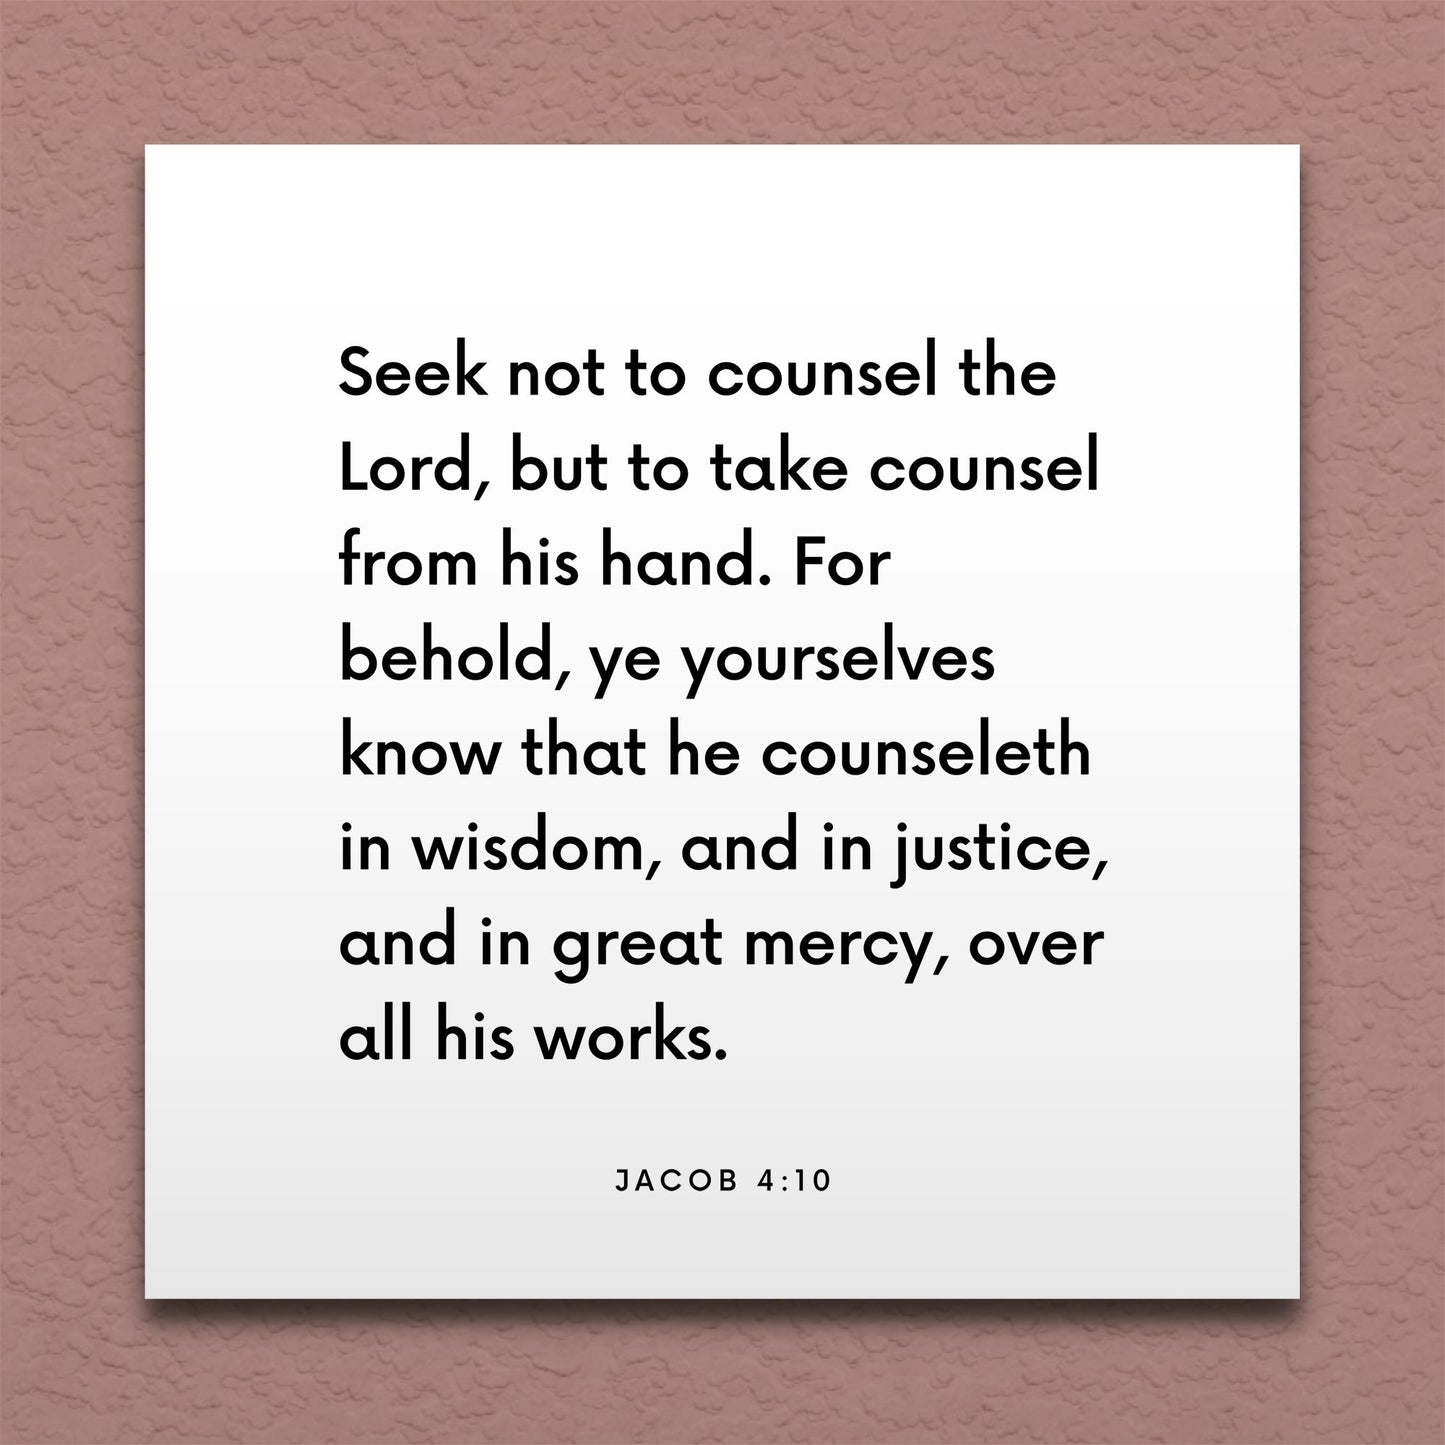 Wall-mounted scripture tile for Jacob 4:10 - "Seek not to counsel the Lord"